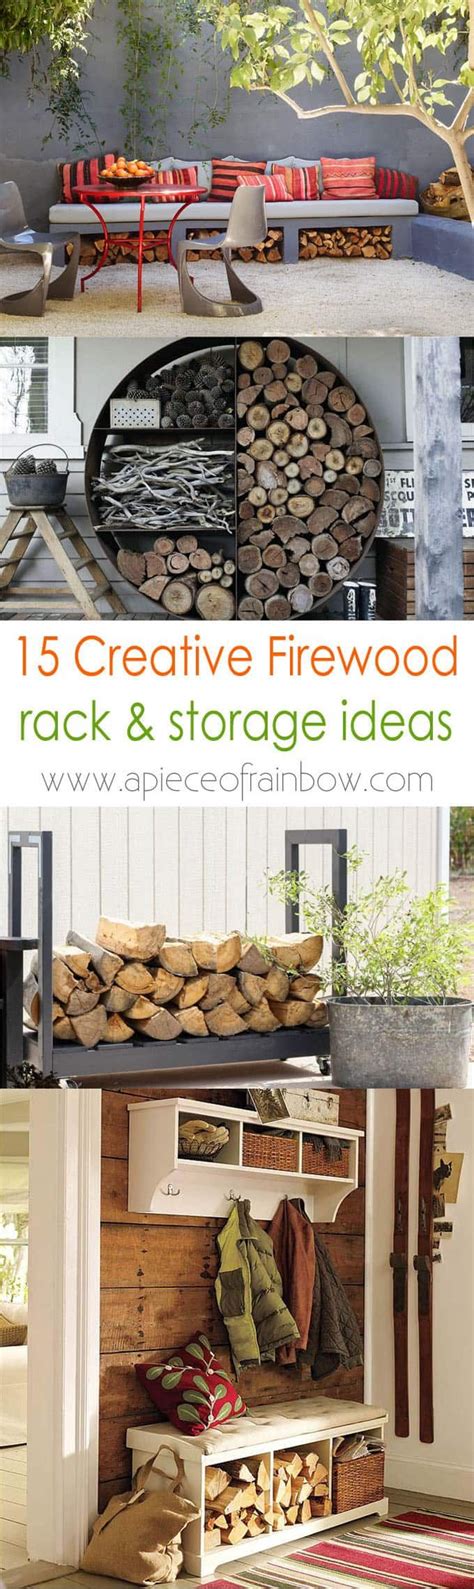 An Outdoor Firewood Rack And Storage Ideas